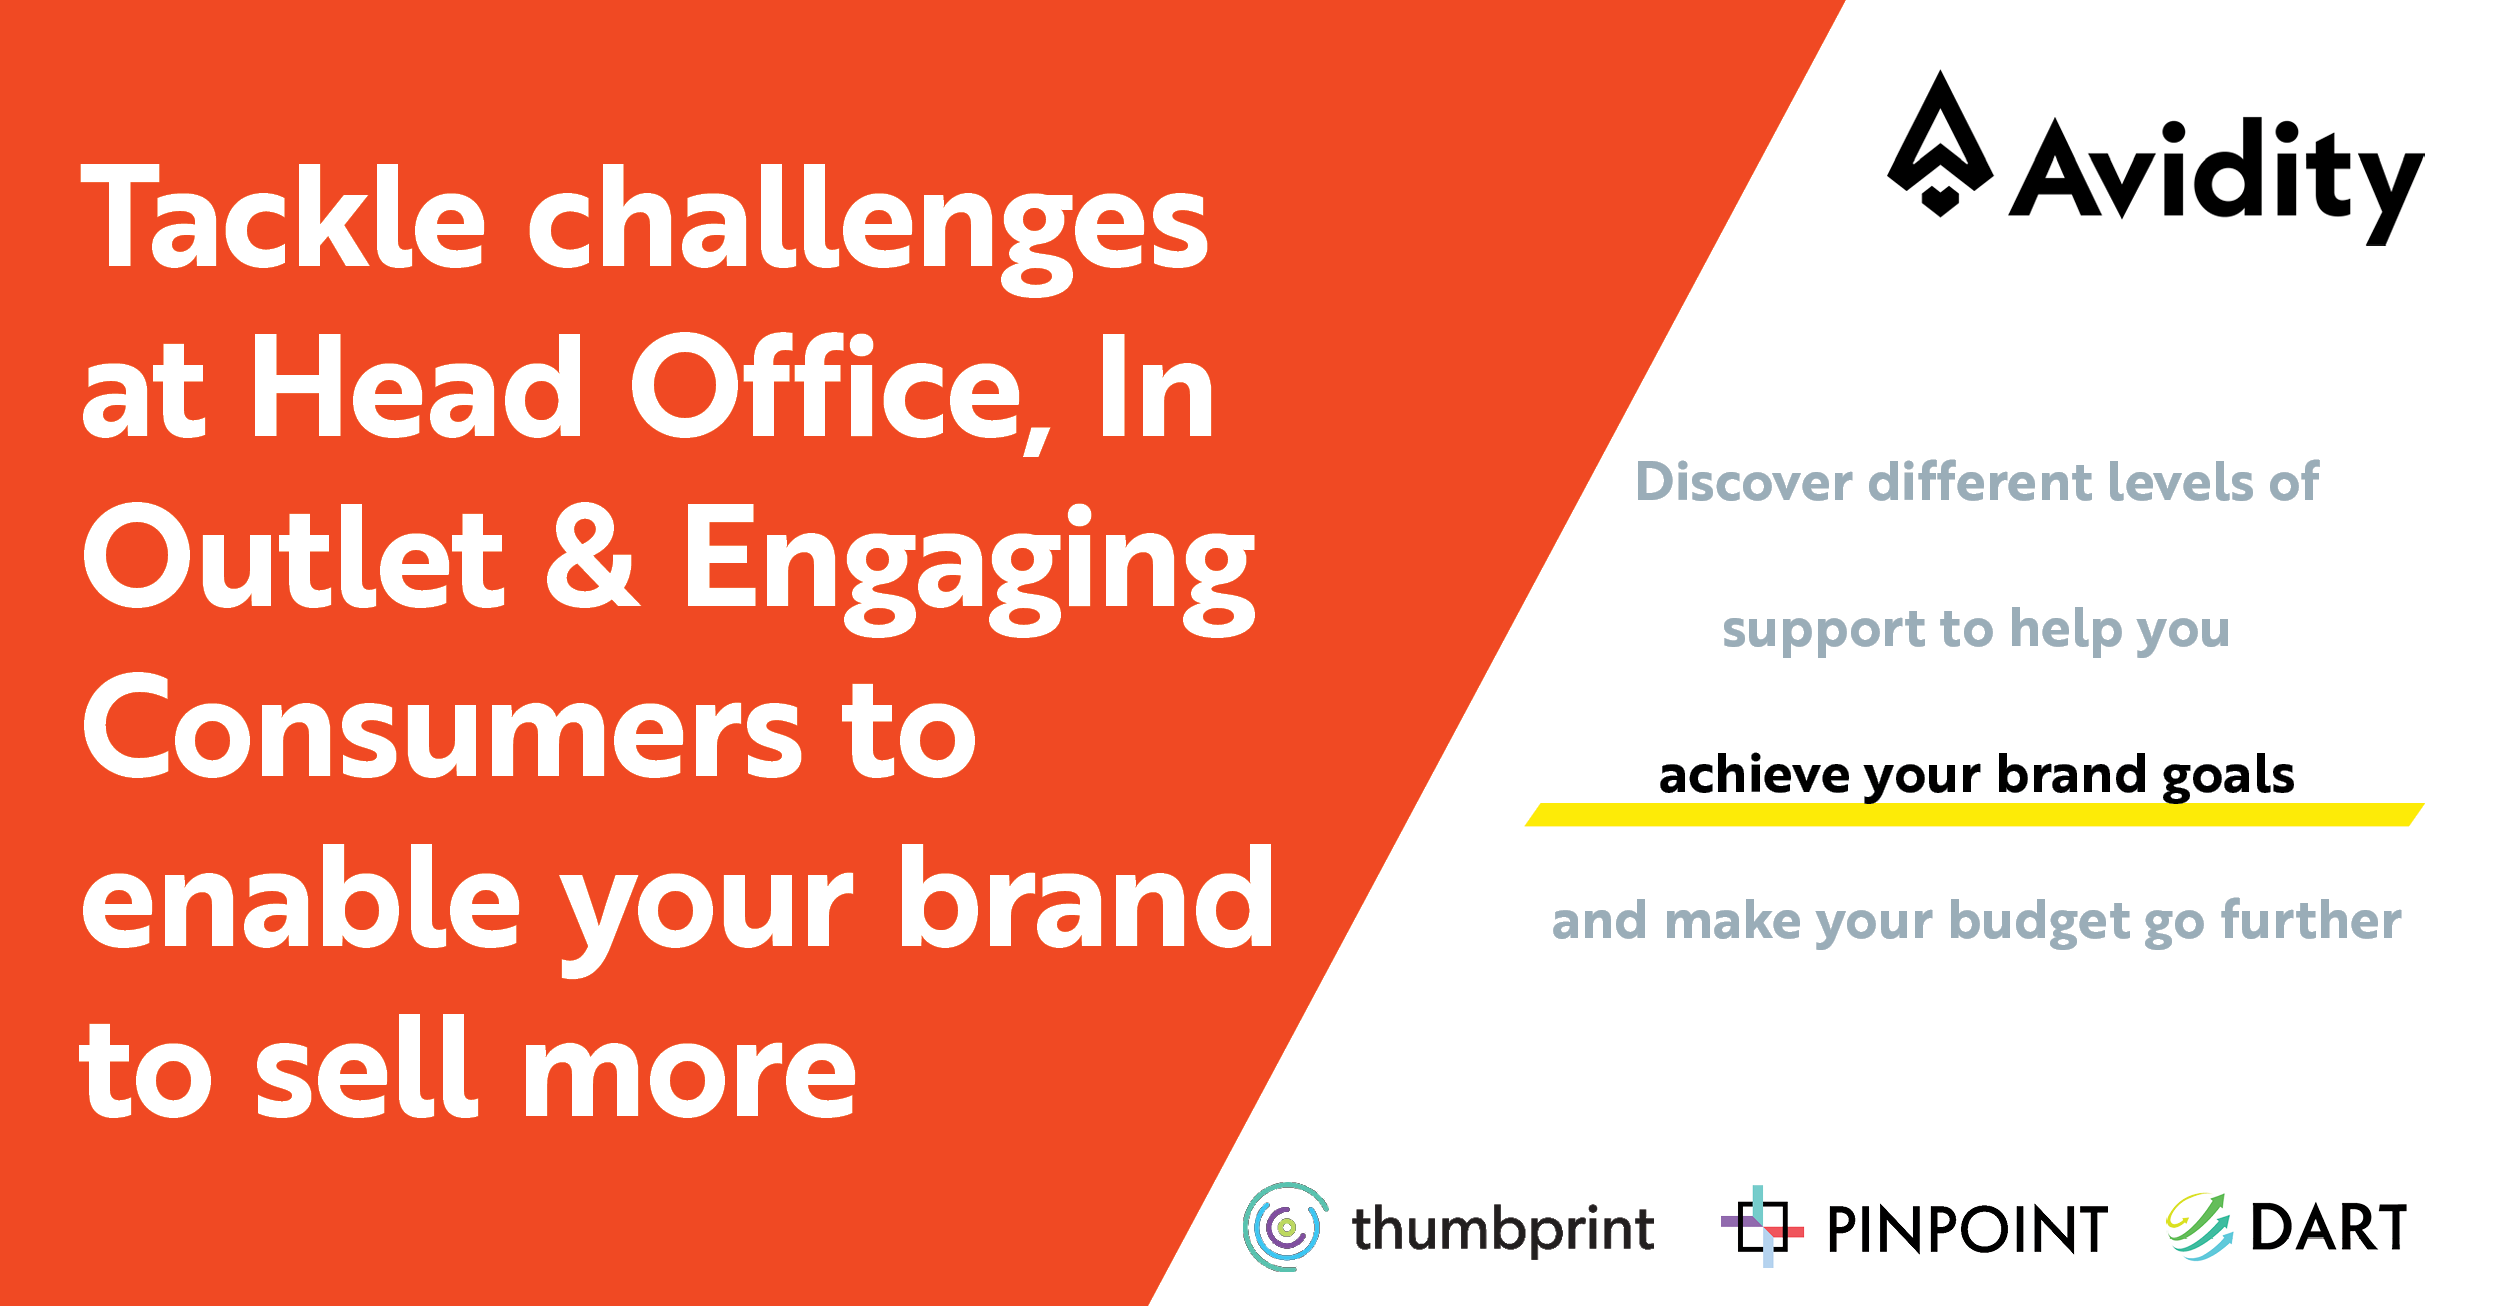 Discover how to tackle challenges at Head Office, In Outlet & Engaging Consumers to enable your brand to sell more…